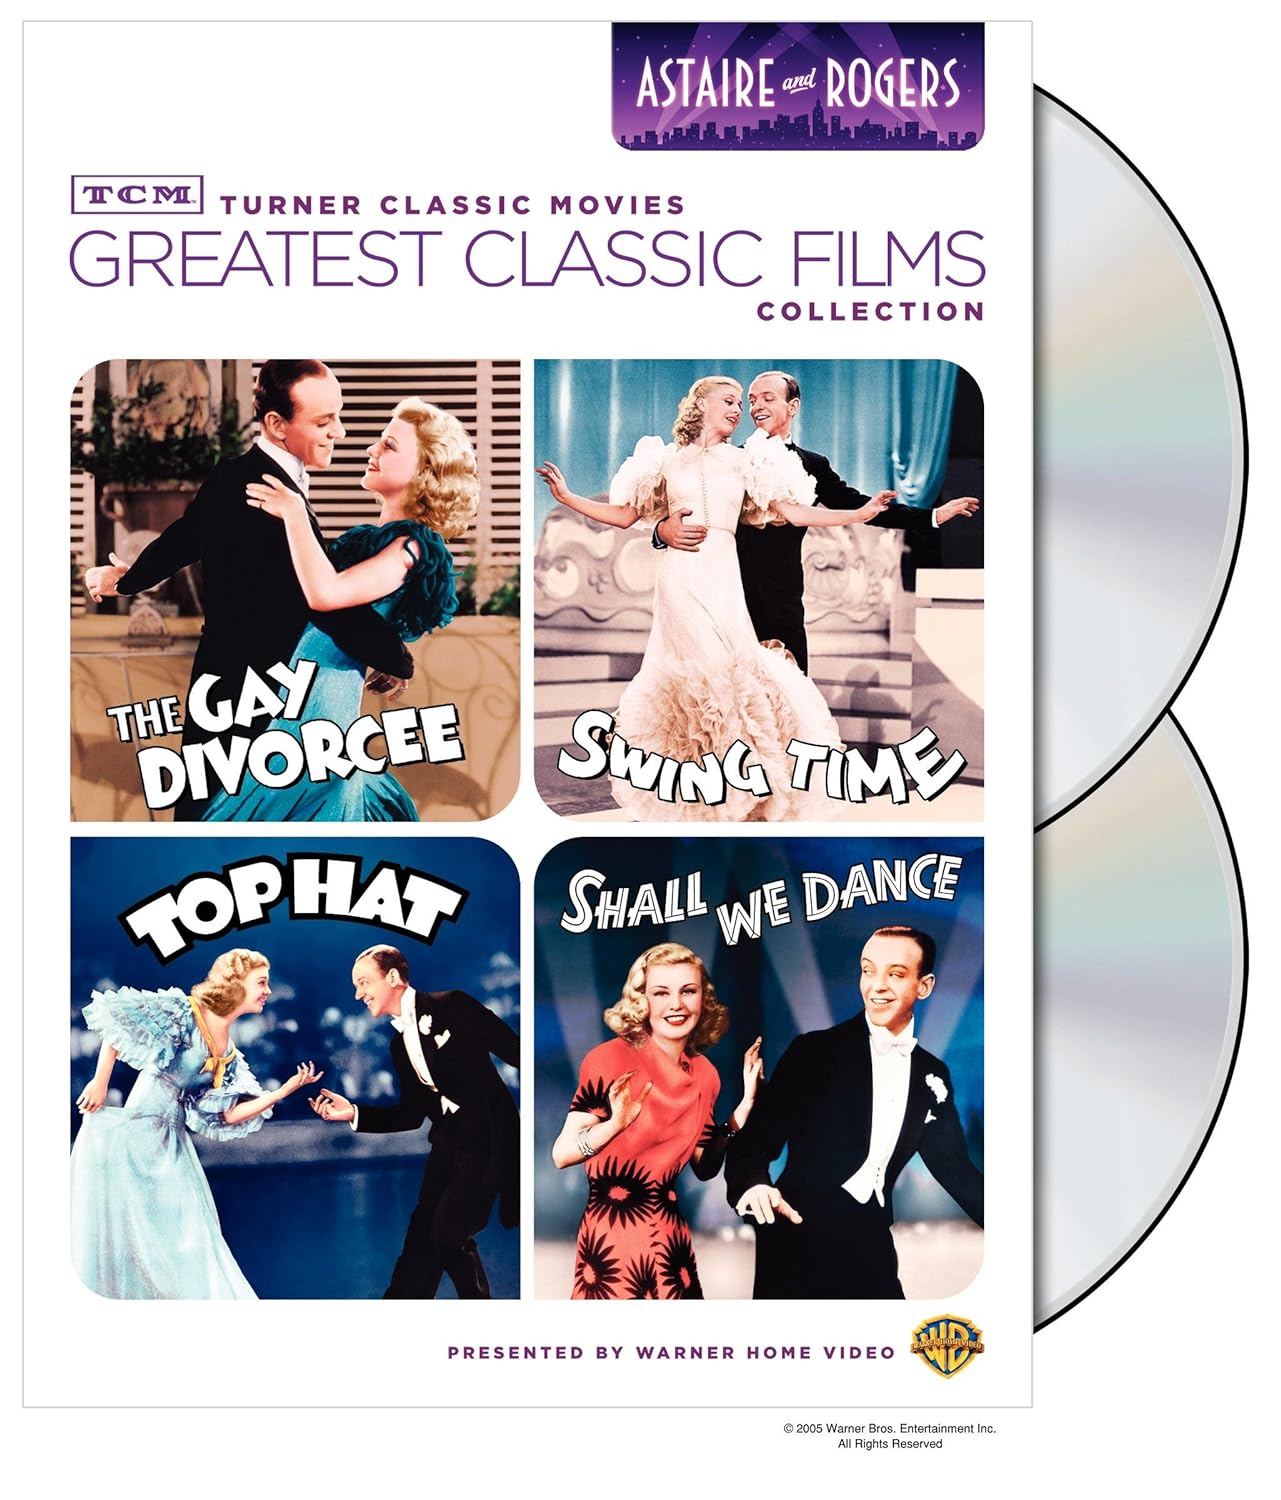 Turner Classic Movies: Astaire & Rogers Greatest Classic Films Collection